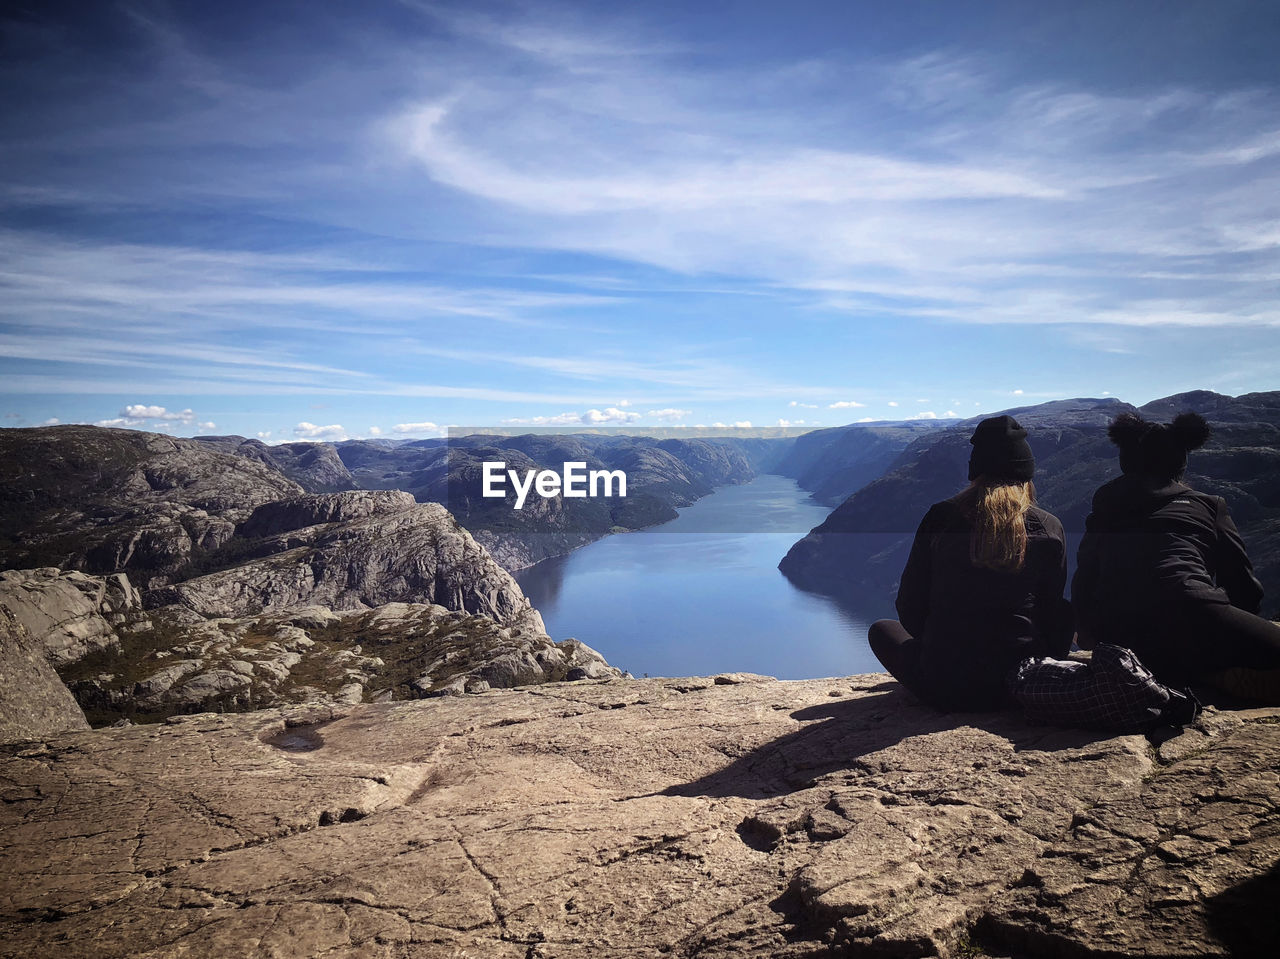 Sitting at the edge of eternity... Norway🇳🇴 Preikestolen Leisure Activity Looking At View Mountain Mountain Range Non-urban Scene Outdoors Rear View Rock - Object Scenics - Nature Sitting A New Beginning A New Beginning My Best Photo Stay Out The Great Outdoors - 2019 EyeEm Awards Stay Positive! Awards 2021: The Great Outdoors